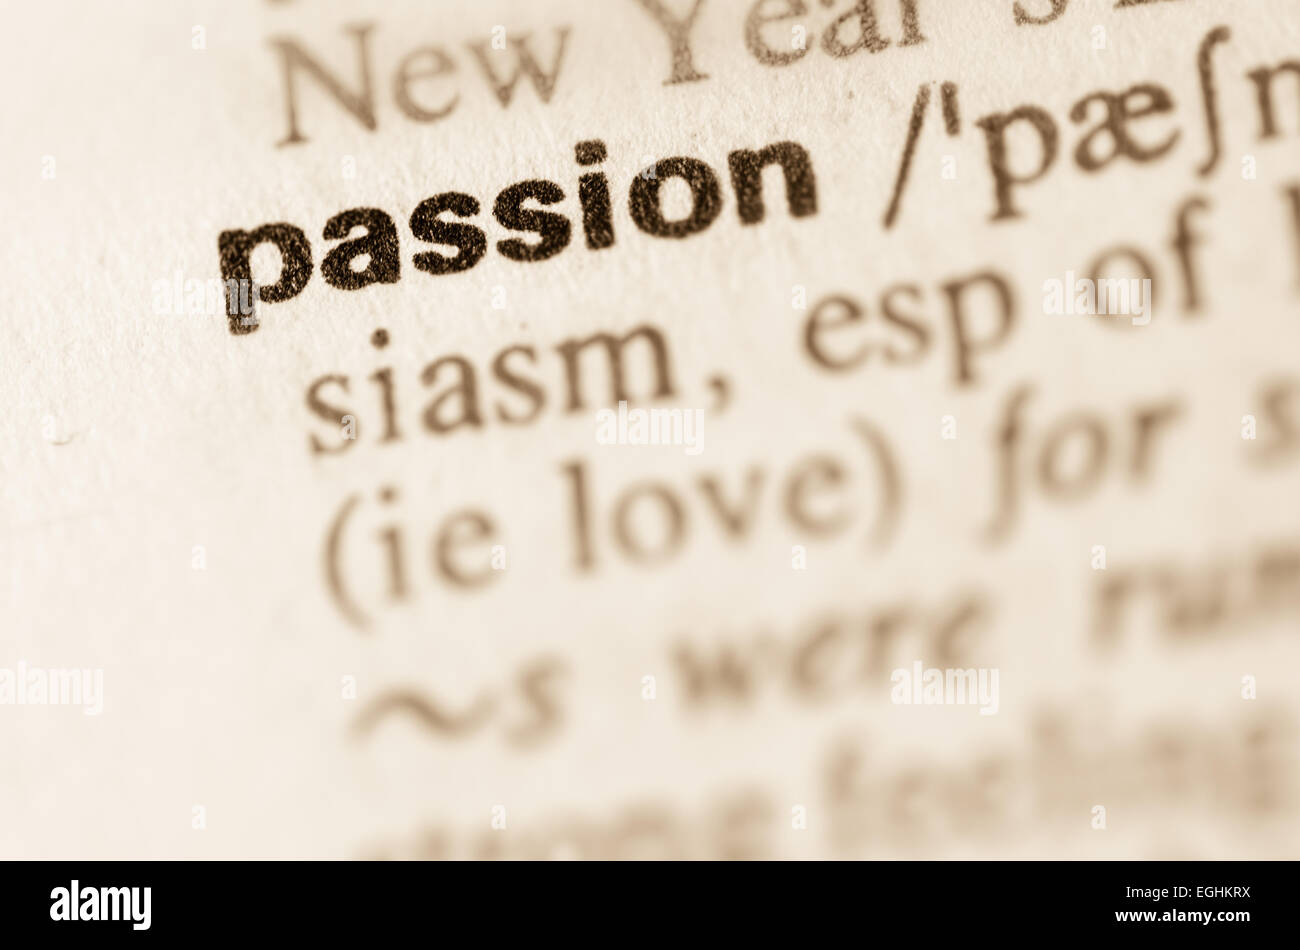 Definition of word passion in dictionary Stock Photo